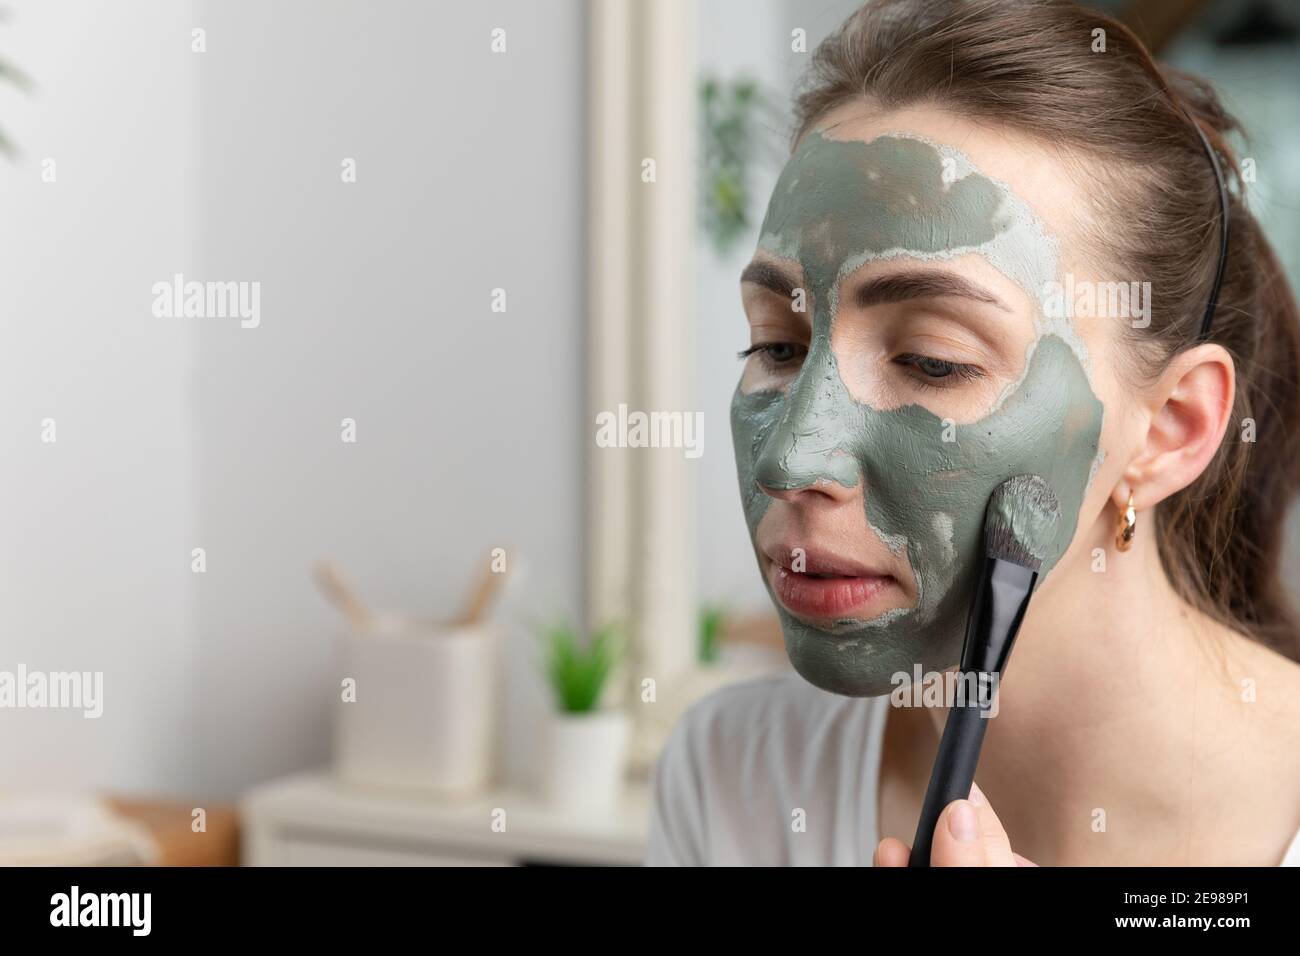 Close up of a beautiful women applying green clay facial mask. Brush touching her skin. Beauty and skin care concept. Stock Photo